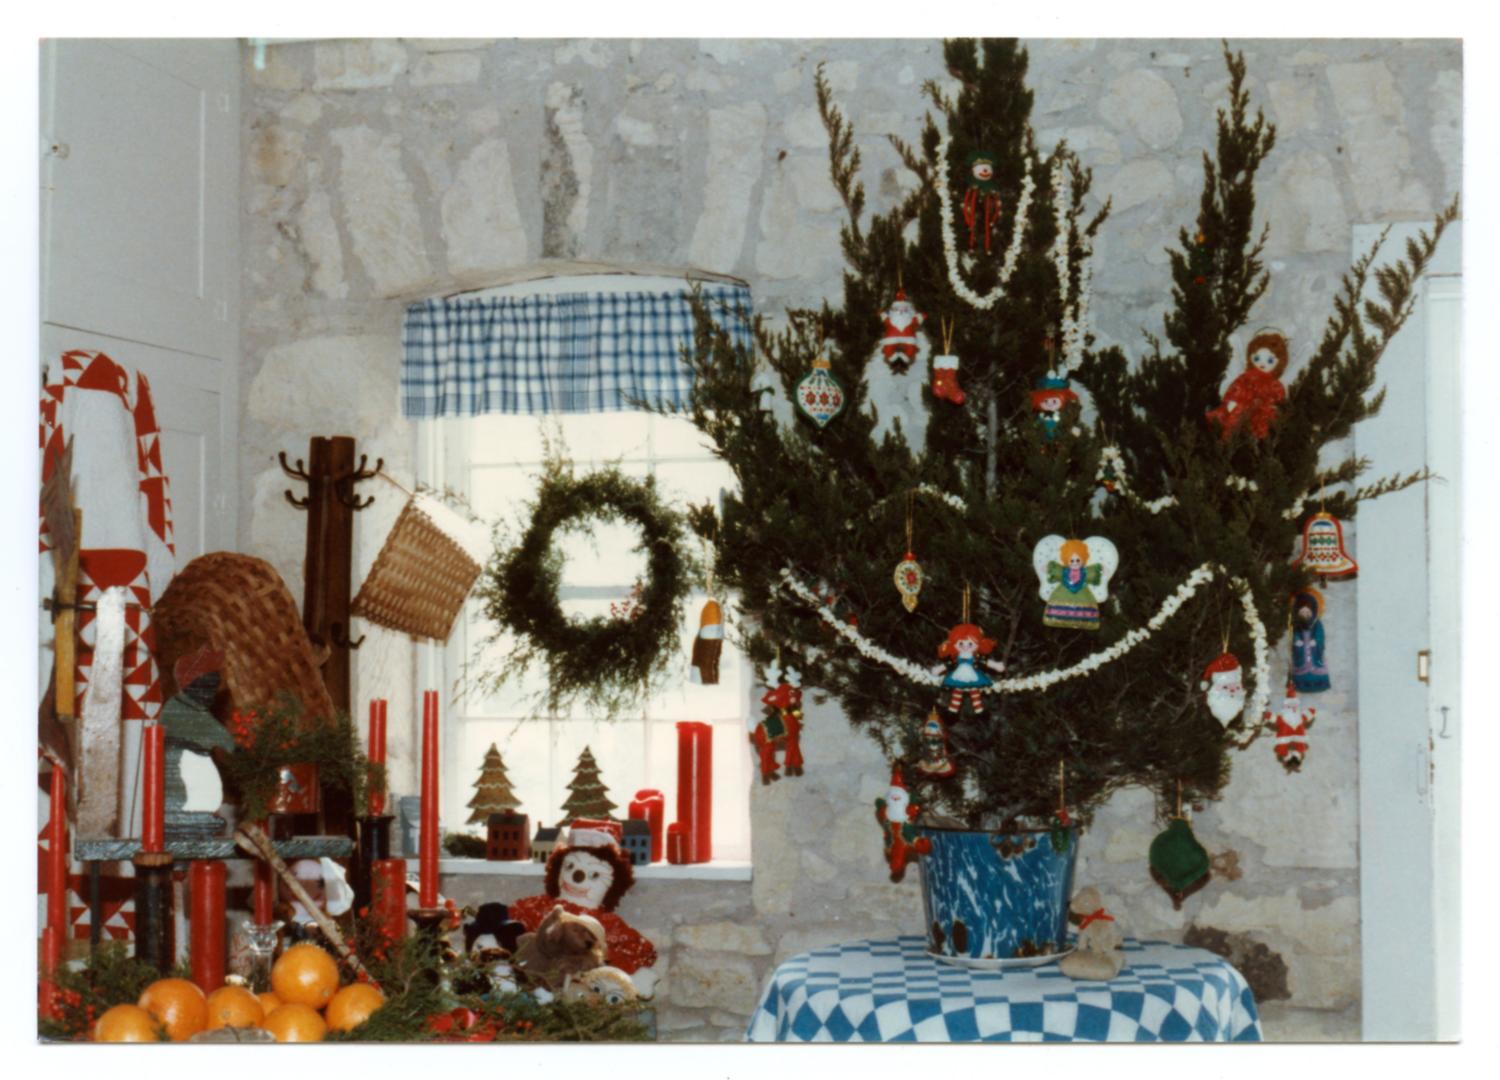  Photograph of Christmas  Decorations  in the Pioneer Museum 